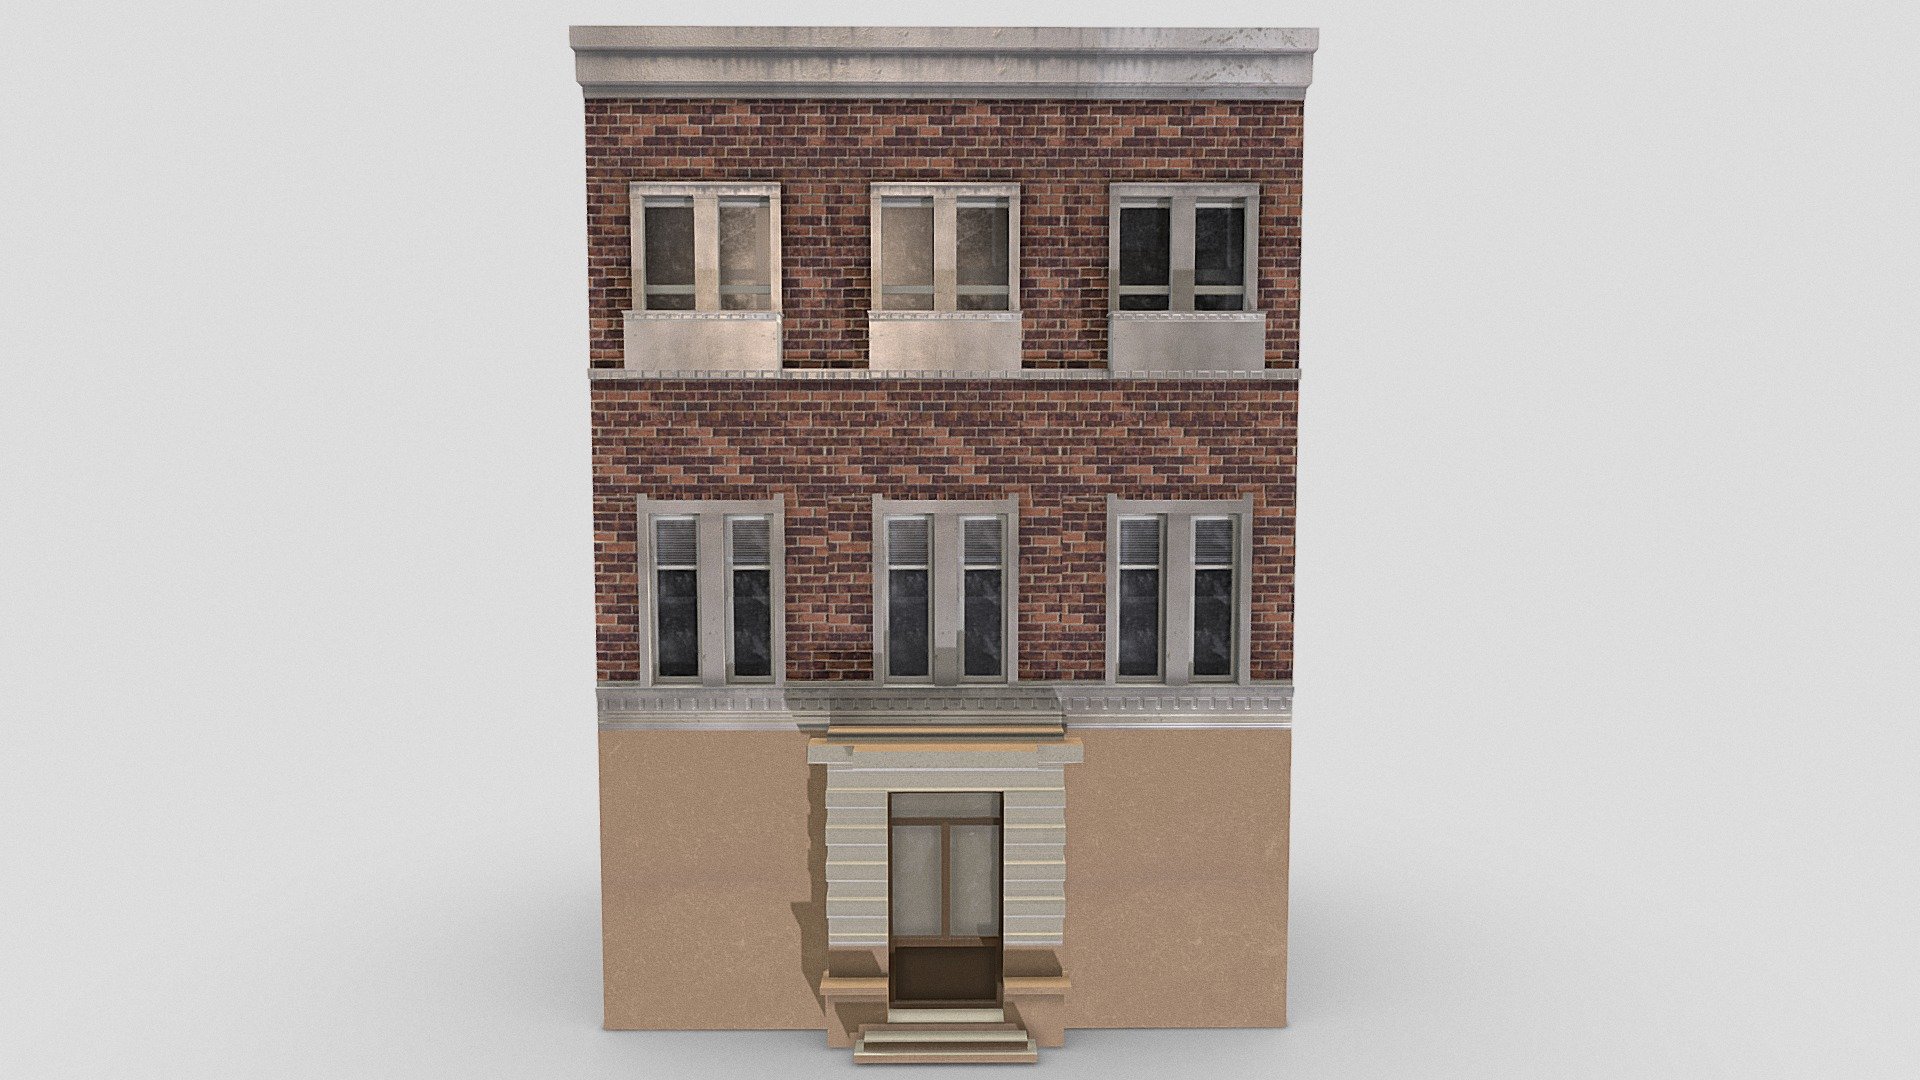 Modular window facade which has a main entrance on the ground floor. All objects are seperate so they can be used on their own.

Useful prop for any sort of outdoor environmment

Pieces include, large window, balcony window, brick walls and entrance. 

PBR textures @4k - Hotel style modular buiding - Buy Royalty Free 3D model by Sousinho 3d model